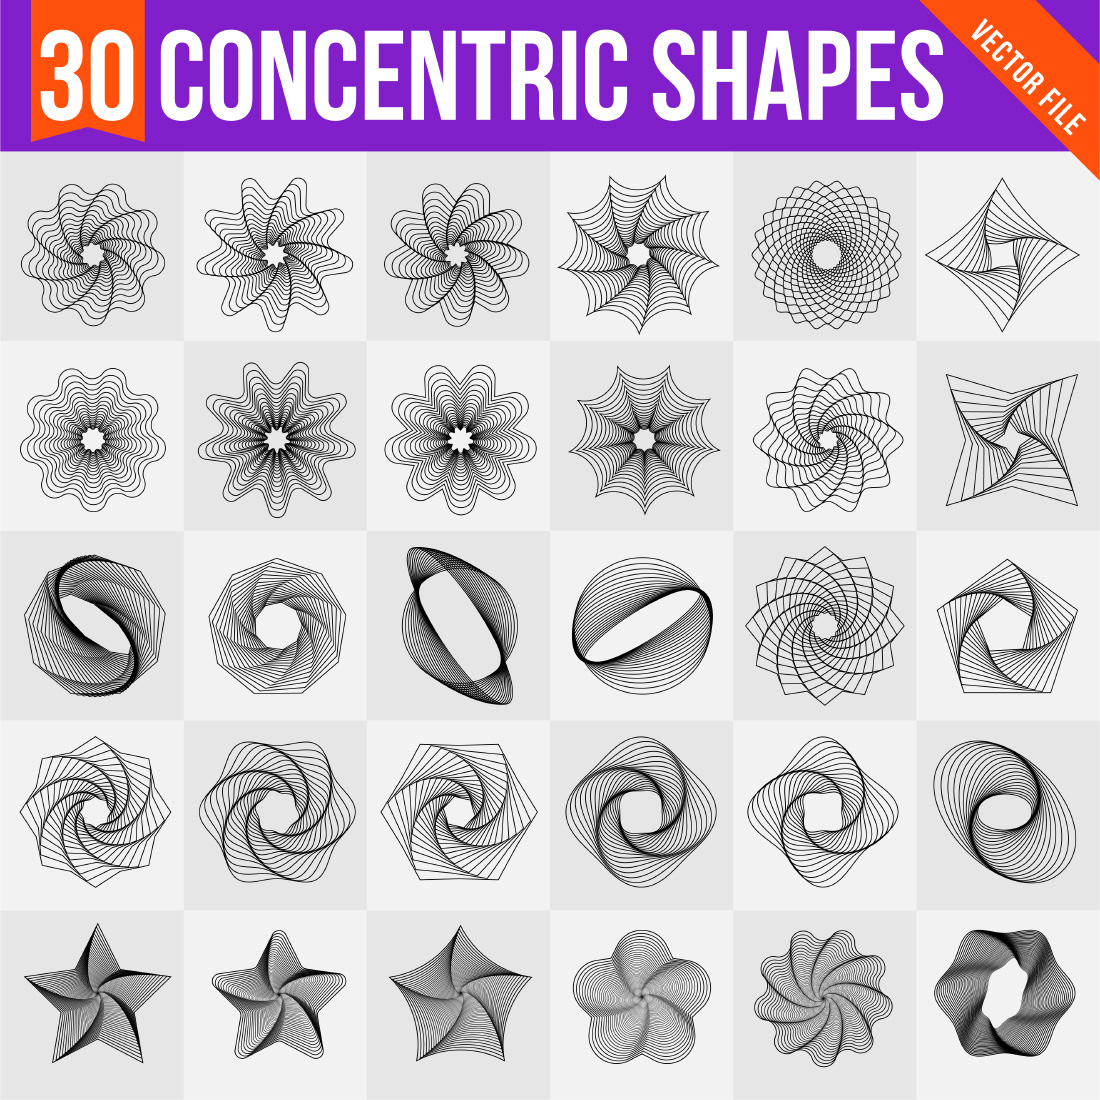 30 Concentric Shapes Preview image.